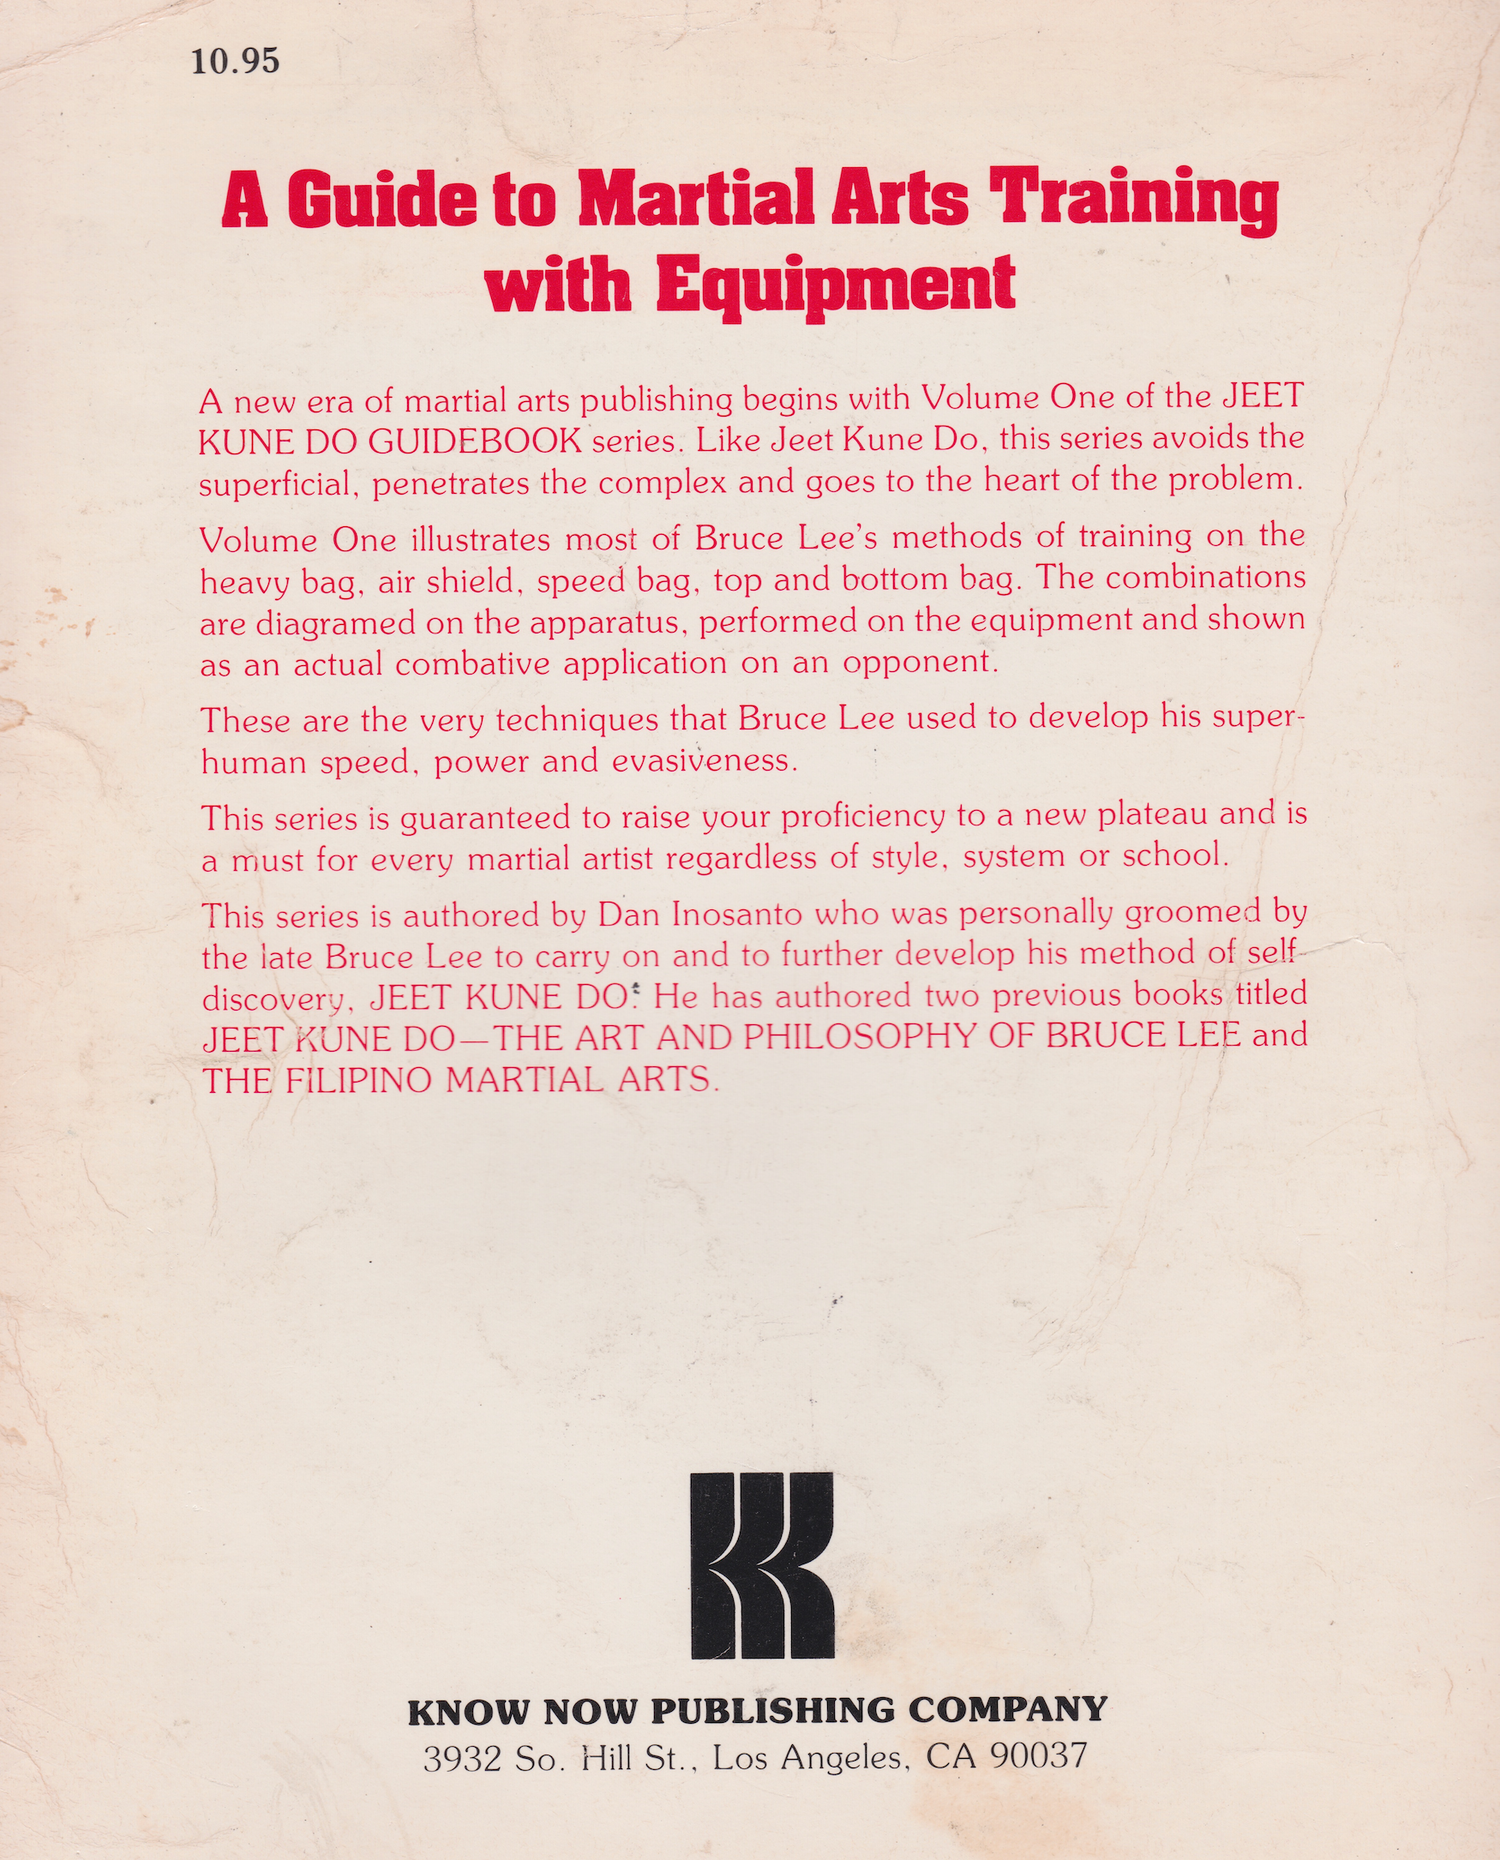 Jeet Kune Do Guidebook 1: A Guide to Martial Arts Training With Equipment Book by Dan Inosanto (Preowned)